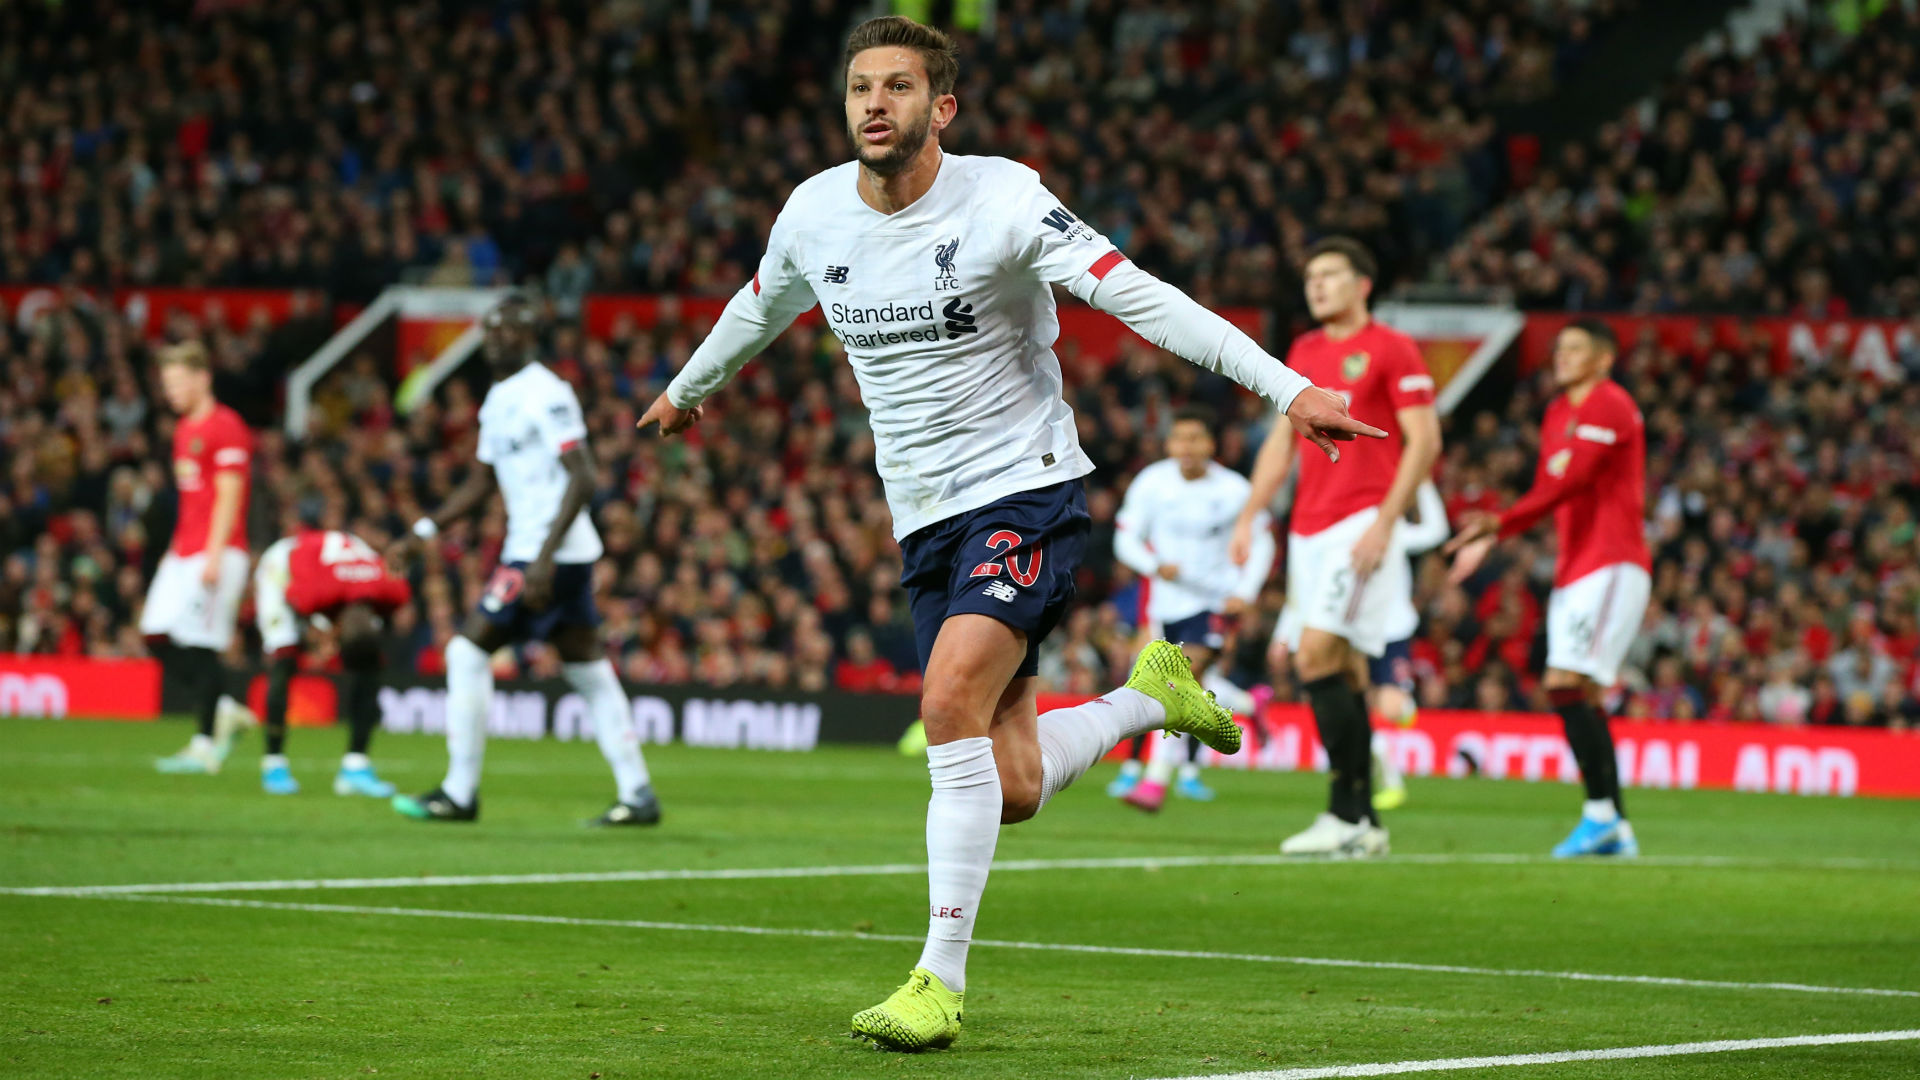 Manchester United 1-1 Liverpool: Lallana rescues point but Reds' winning streak comes to an end